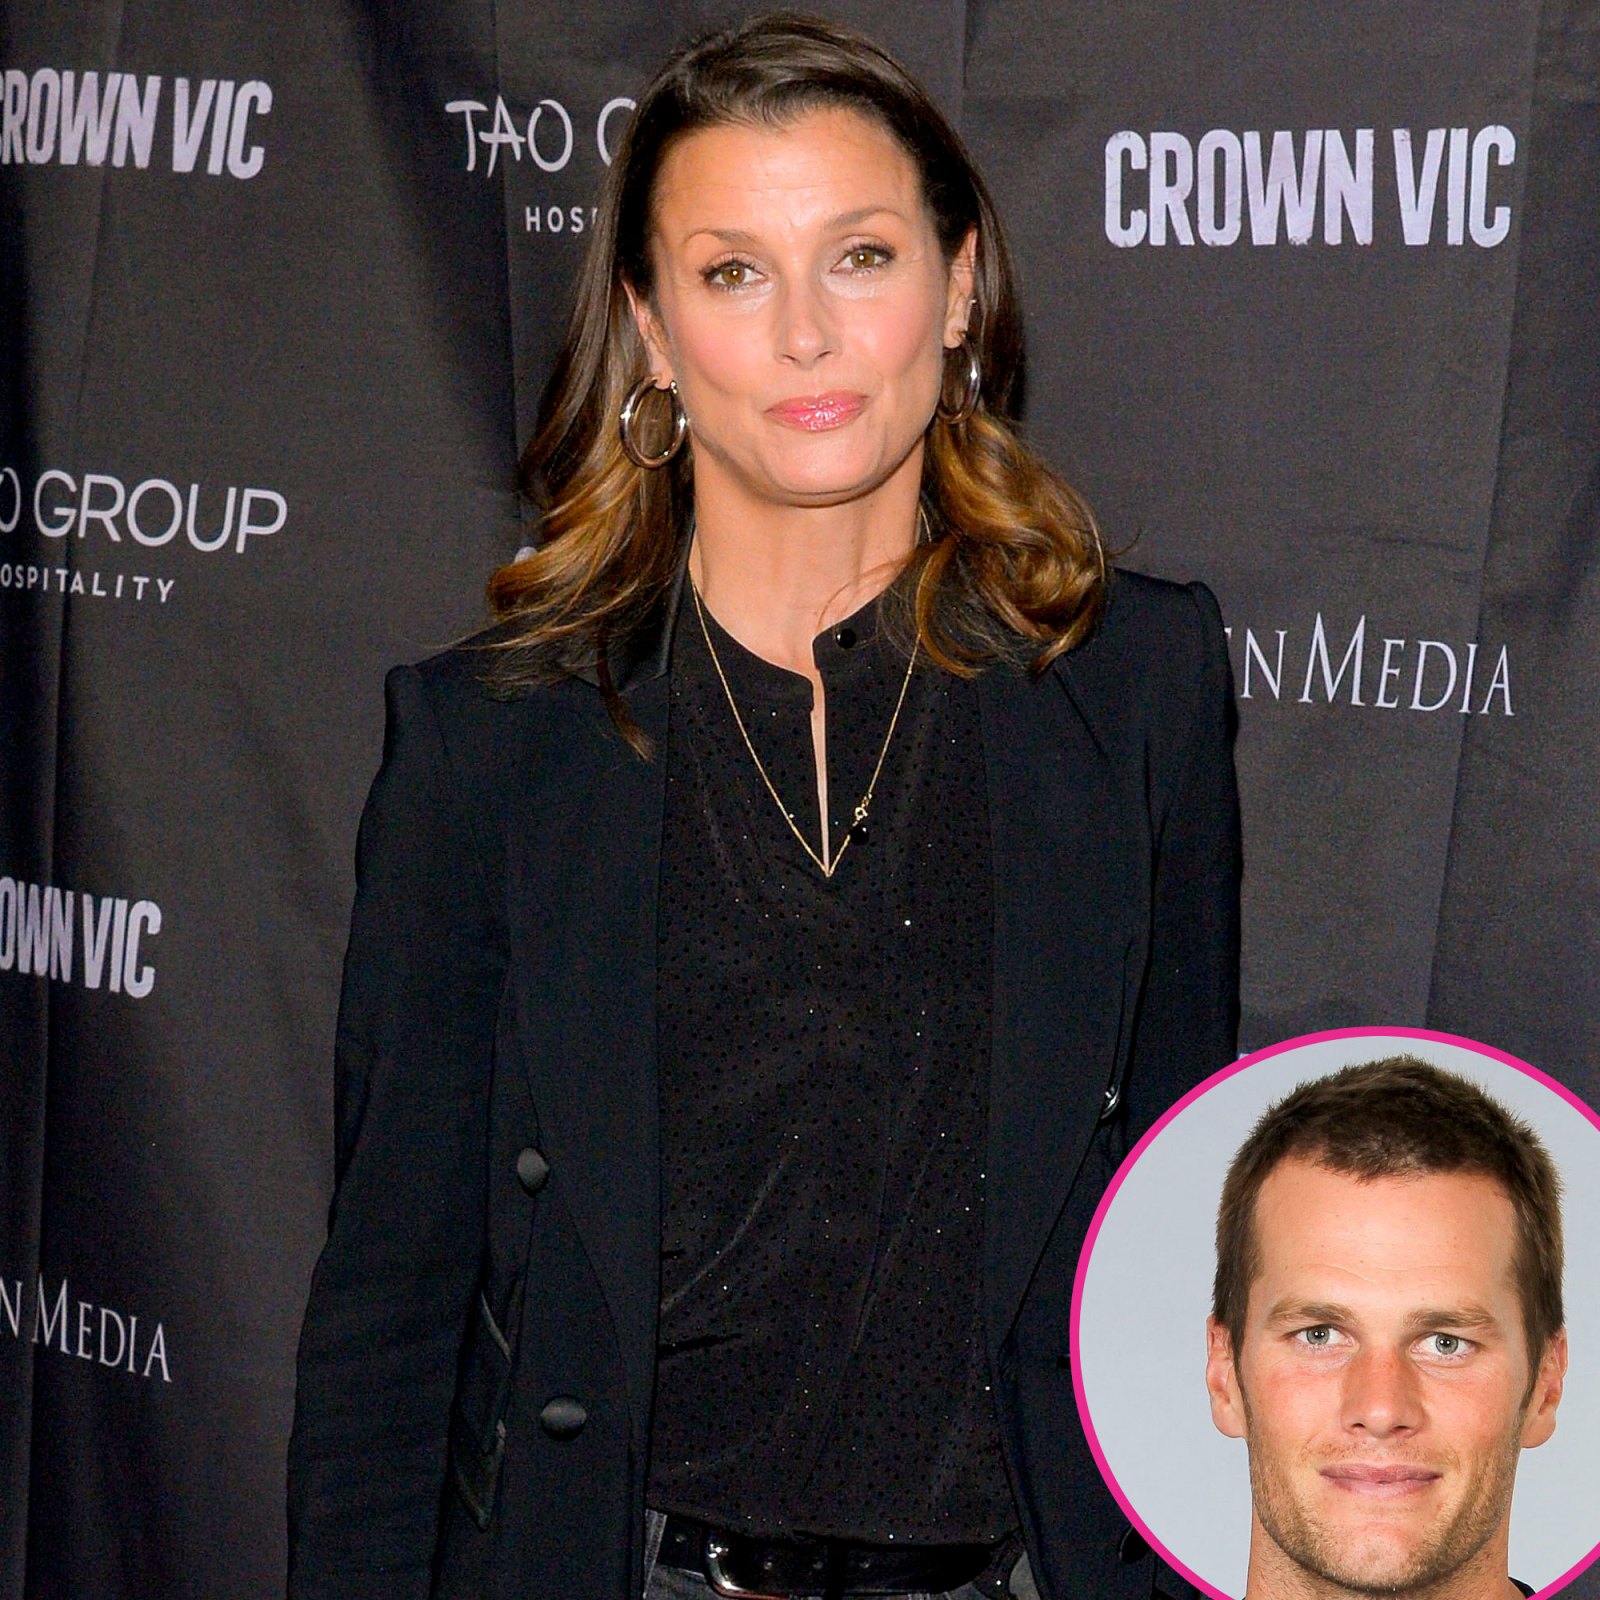 Bridget Moynahans Quotes About Her Relationship With Ex Tom Brady 5127